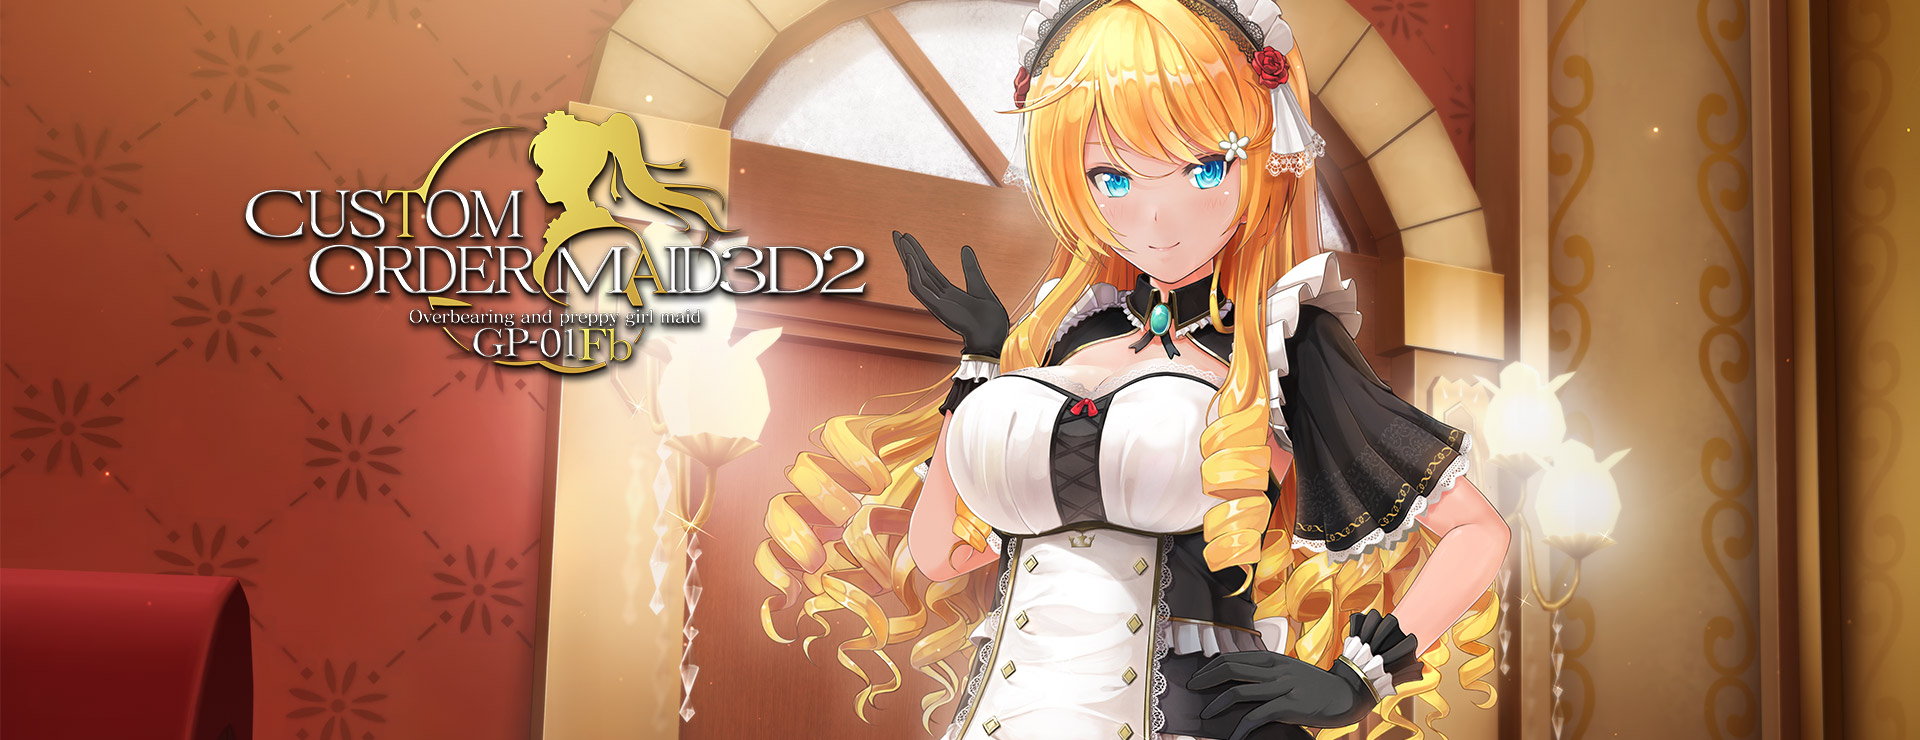 Custom Order Maid 3D2: Overbearing and Preppy Girl Maid GP-01Fb - Simulation Game